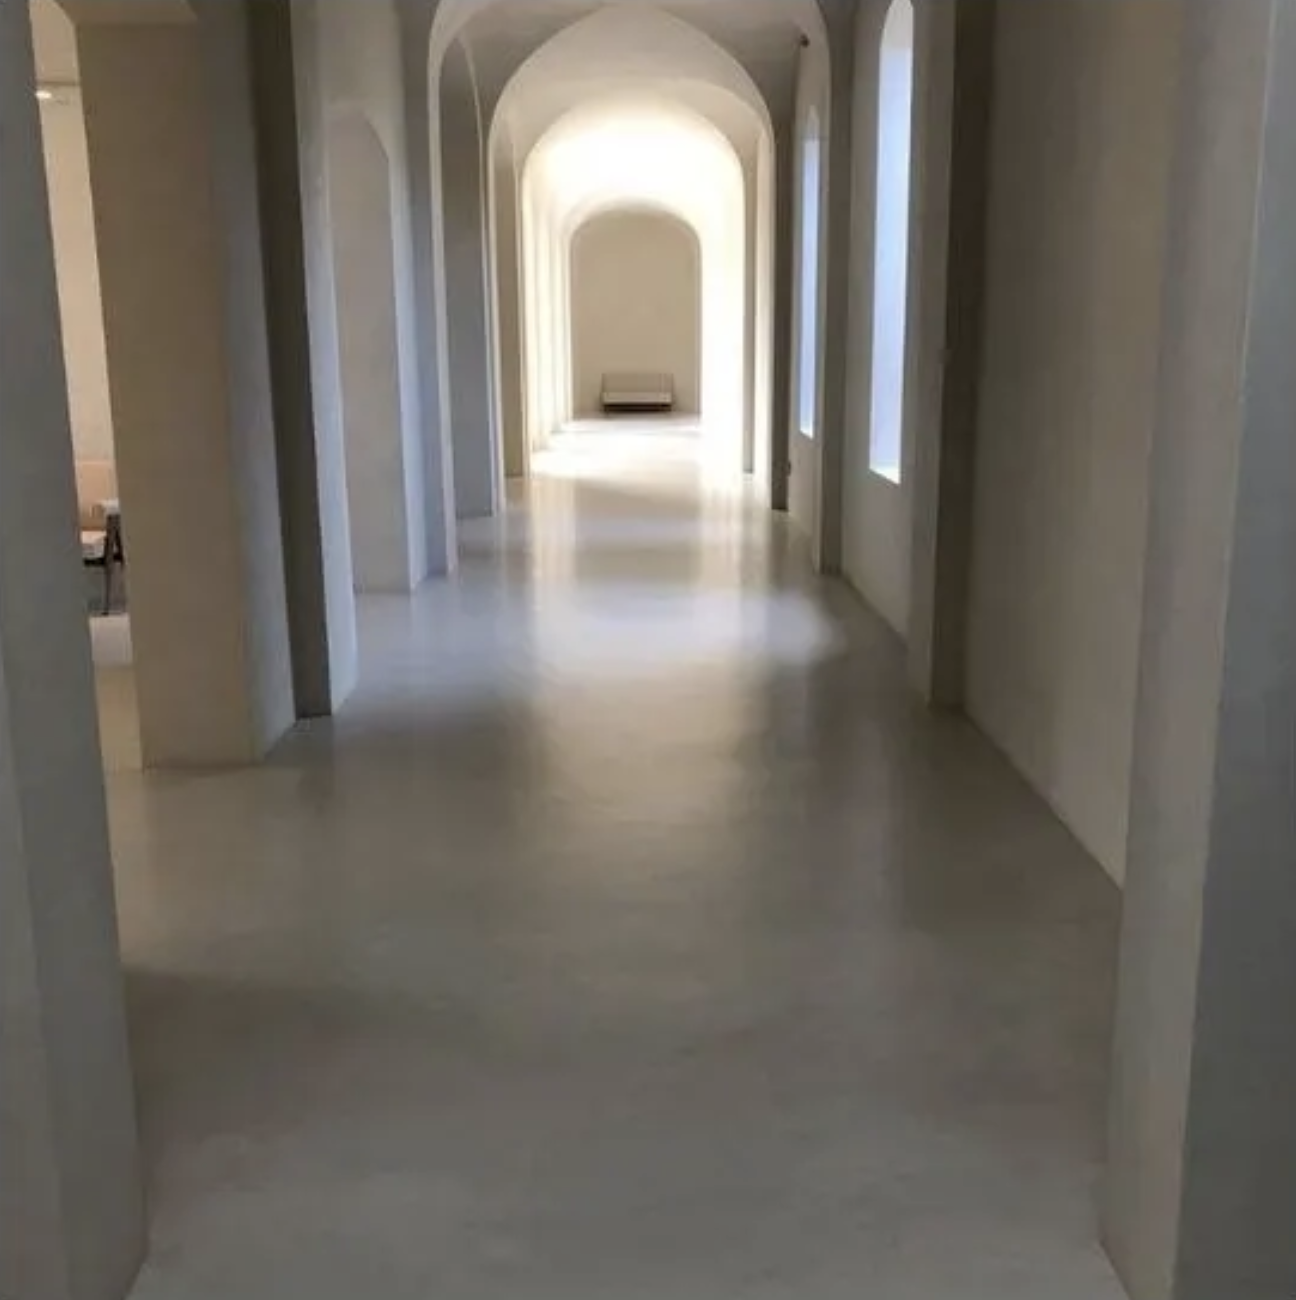 the hallways is absolutely bare and the chandelier is gone